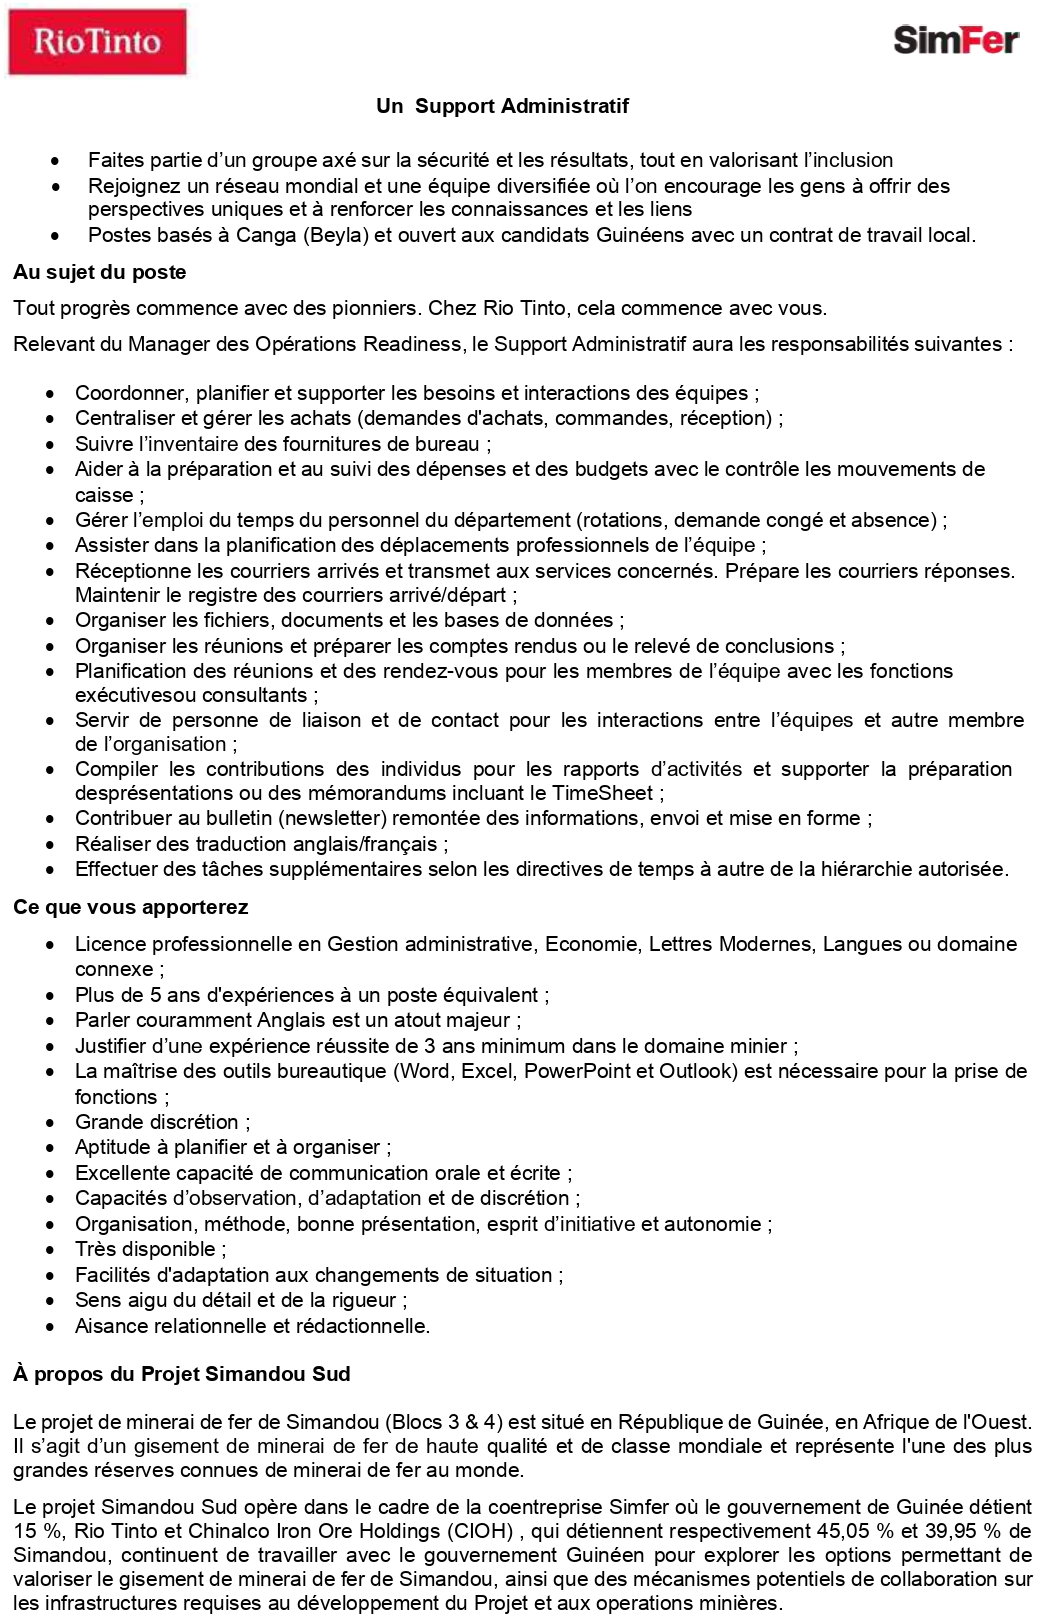 Un Support Administratif | page 1